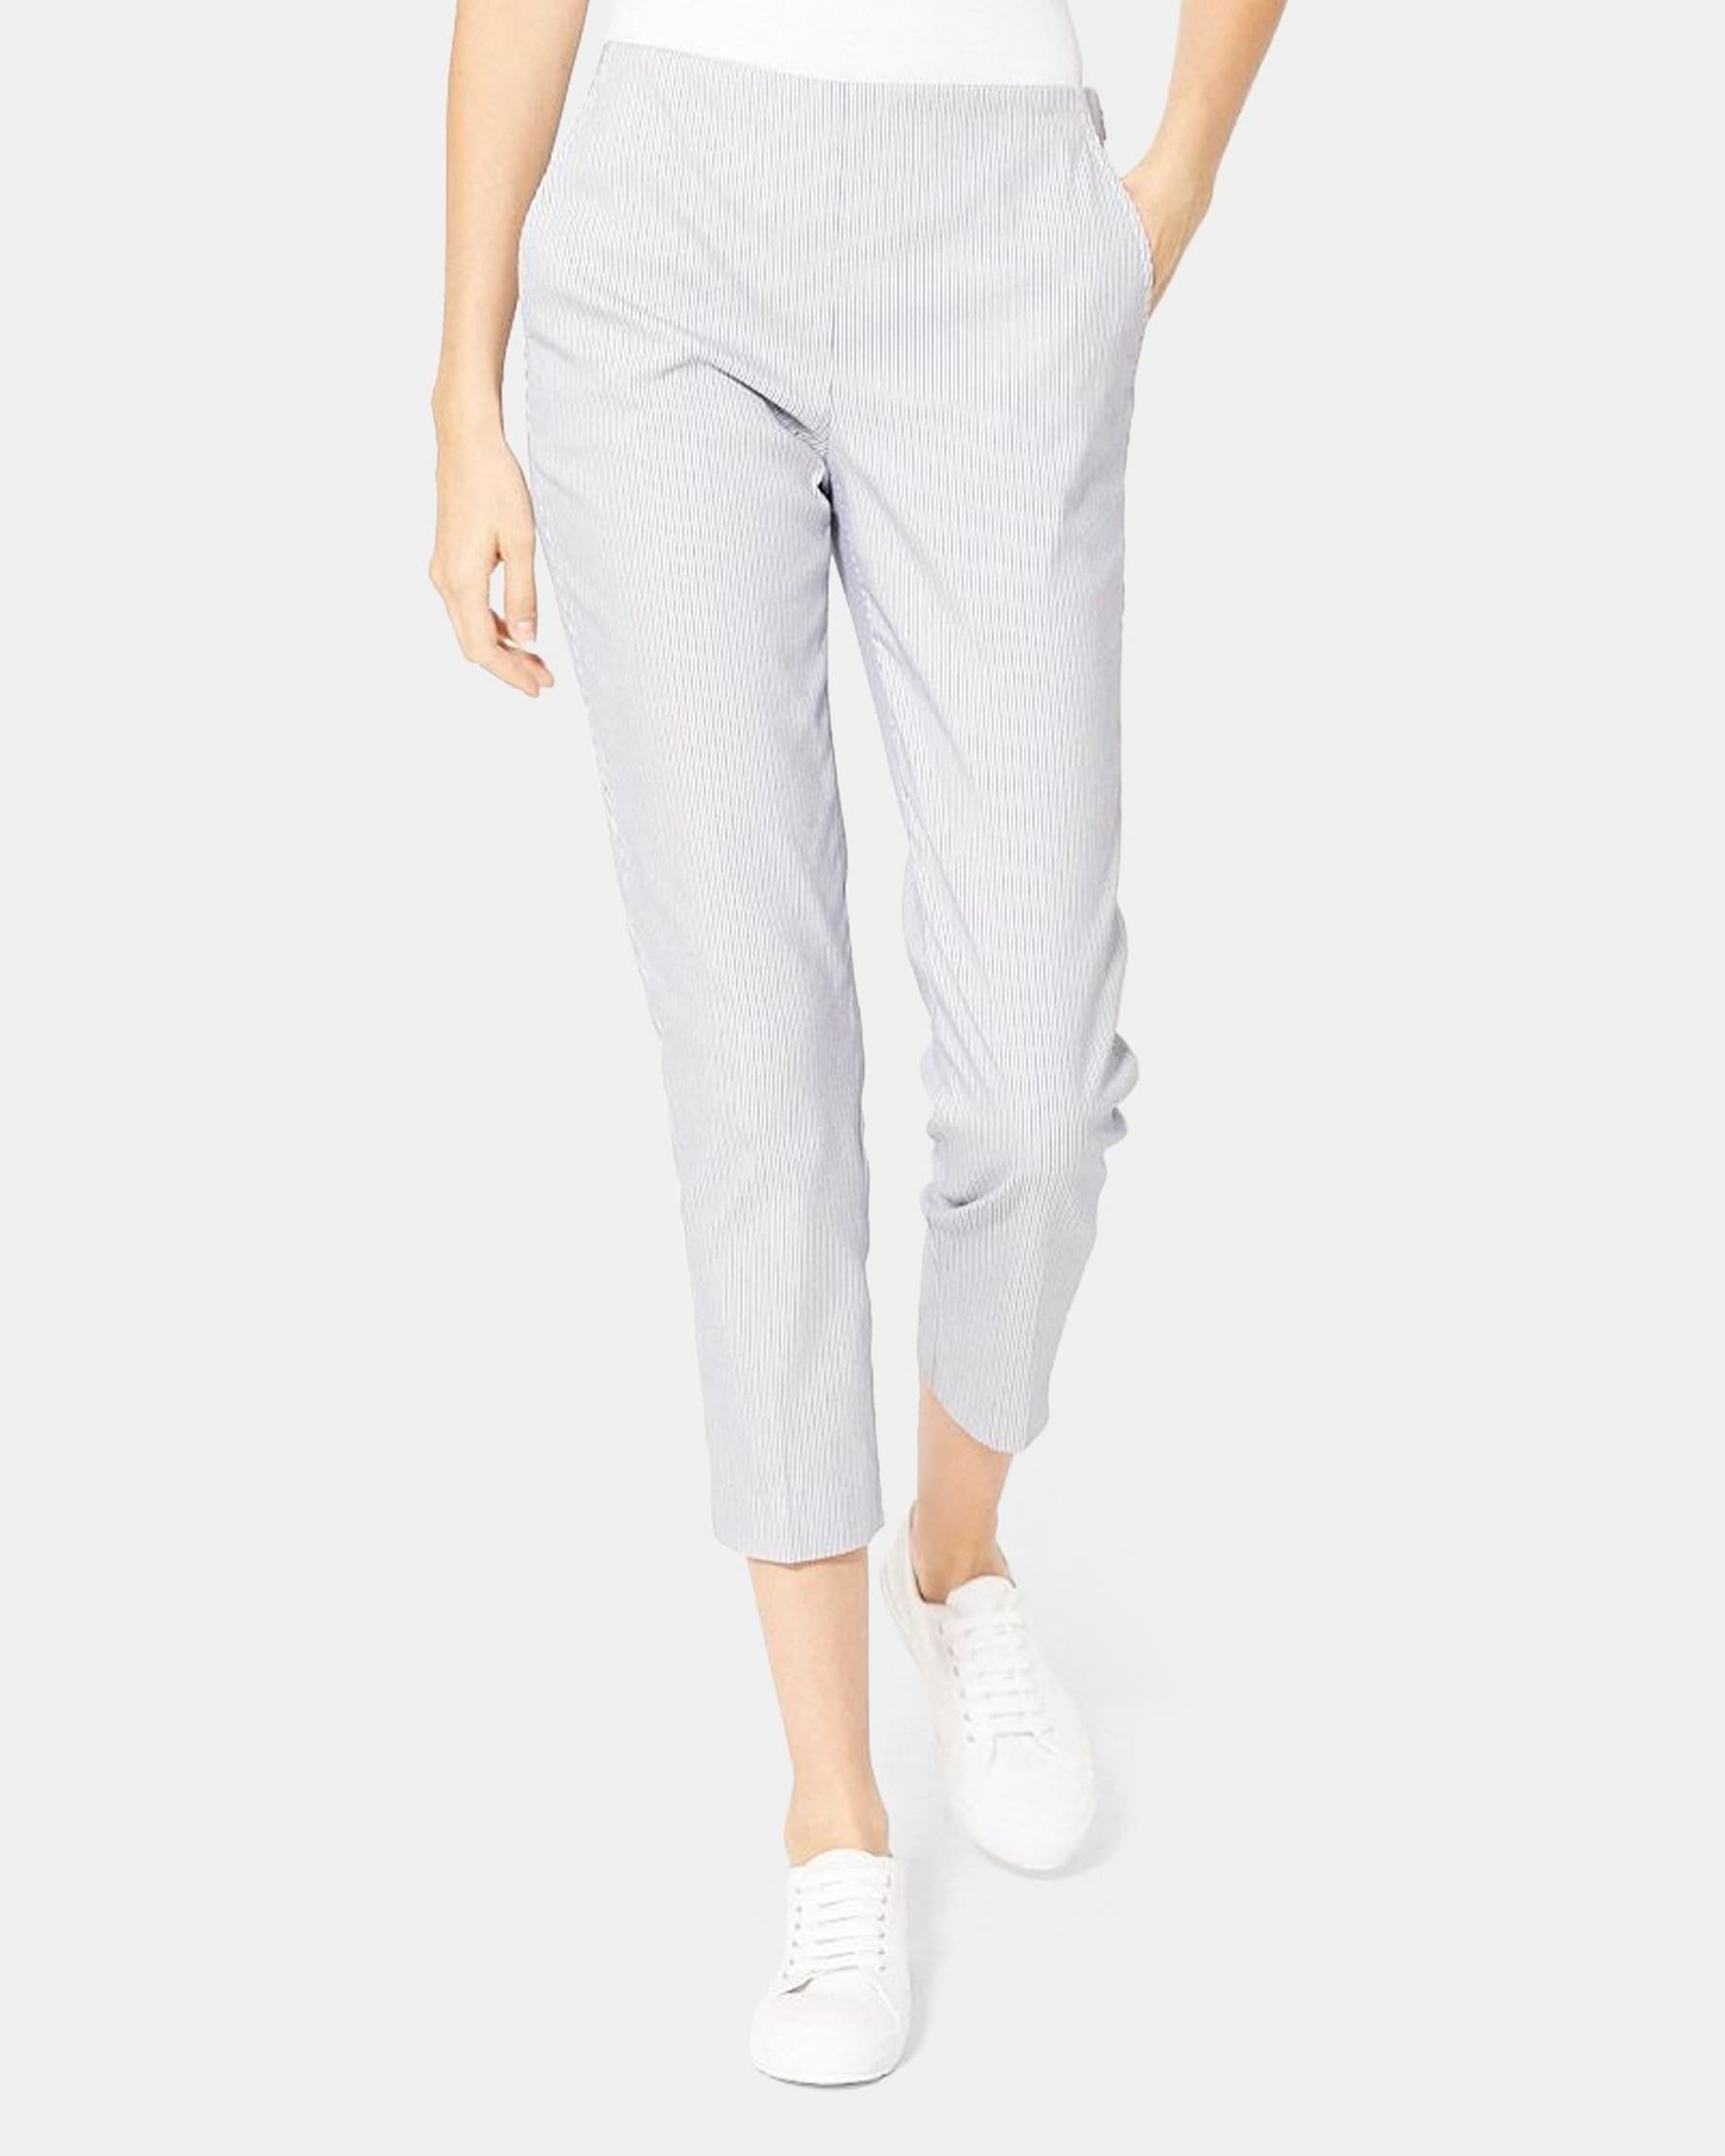 Slim Cropped Pant in Stretch Cotton Blend